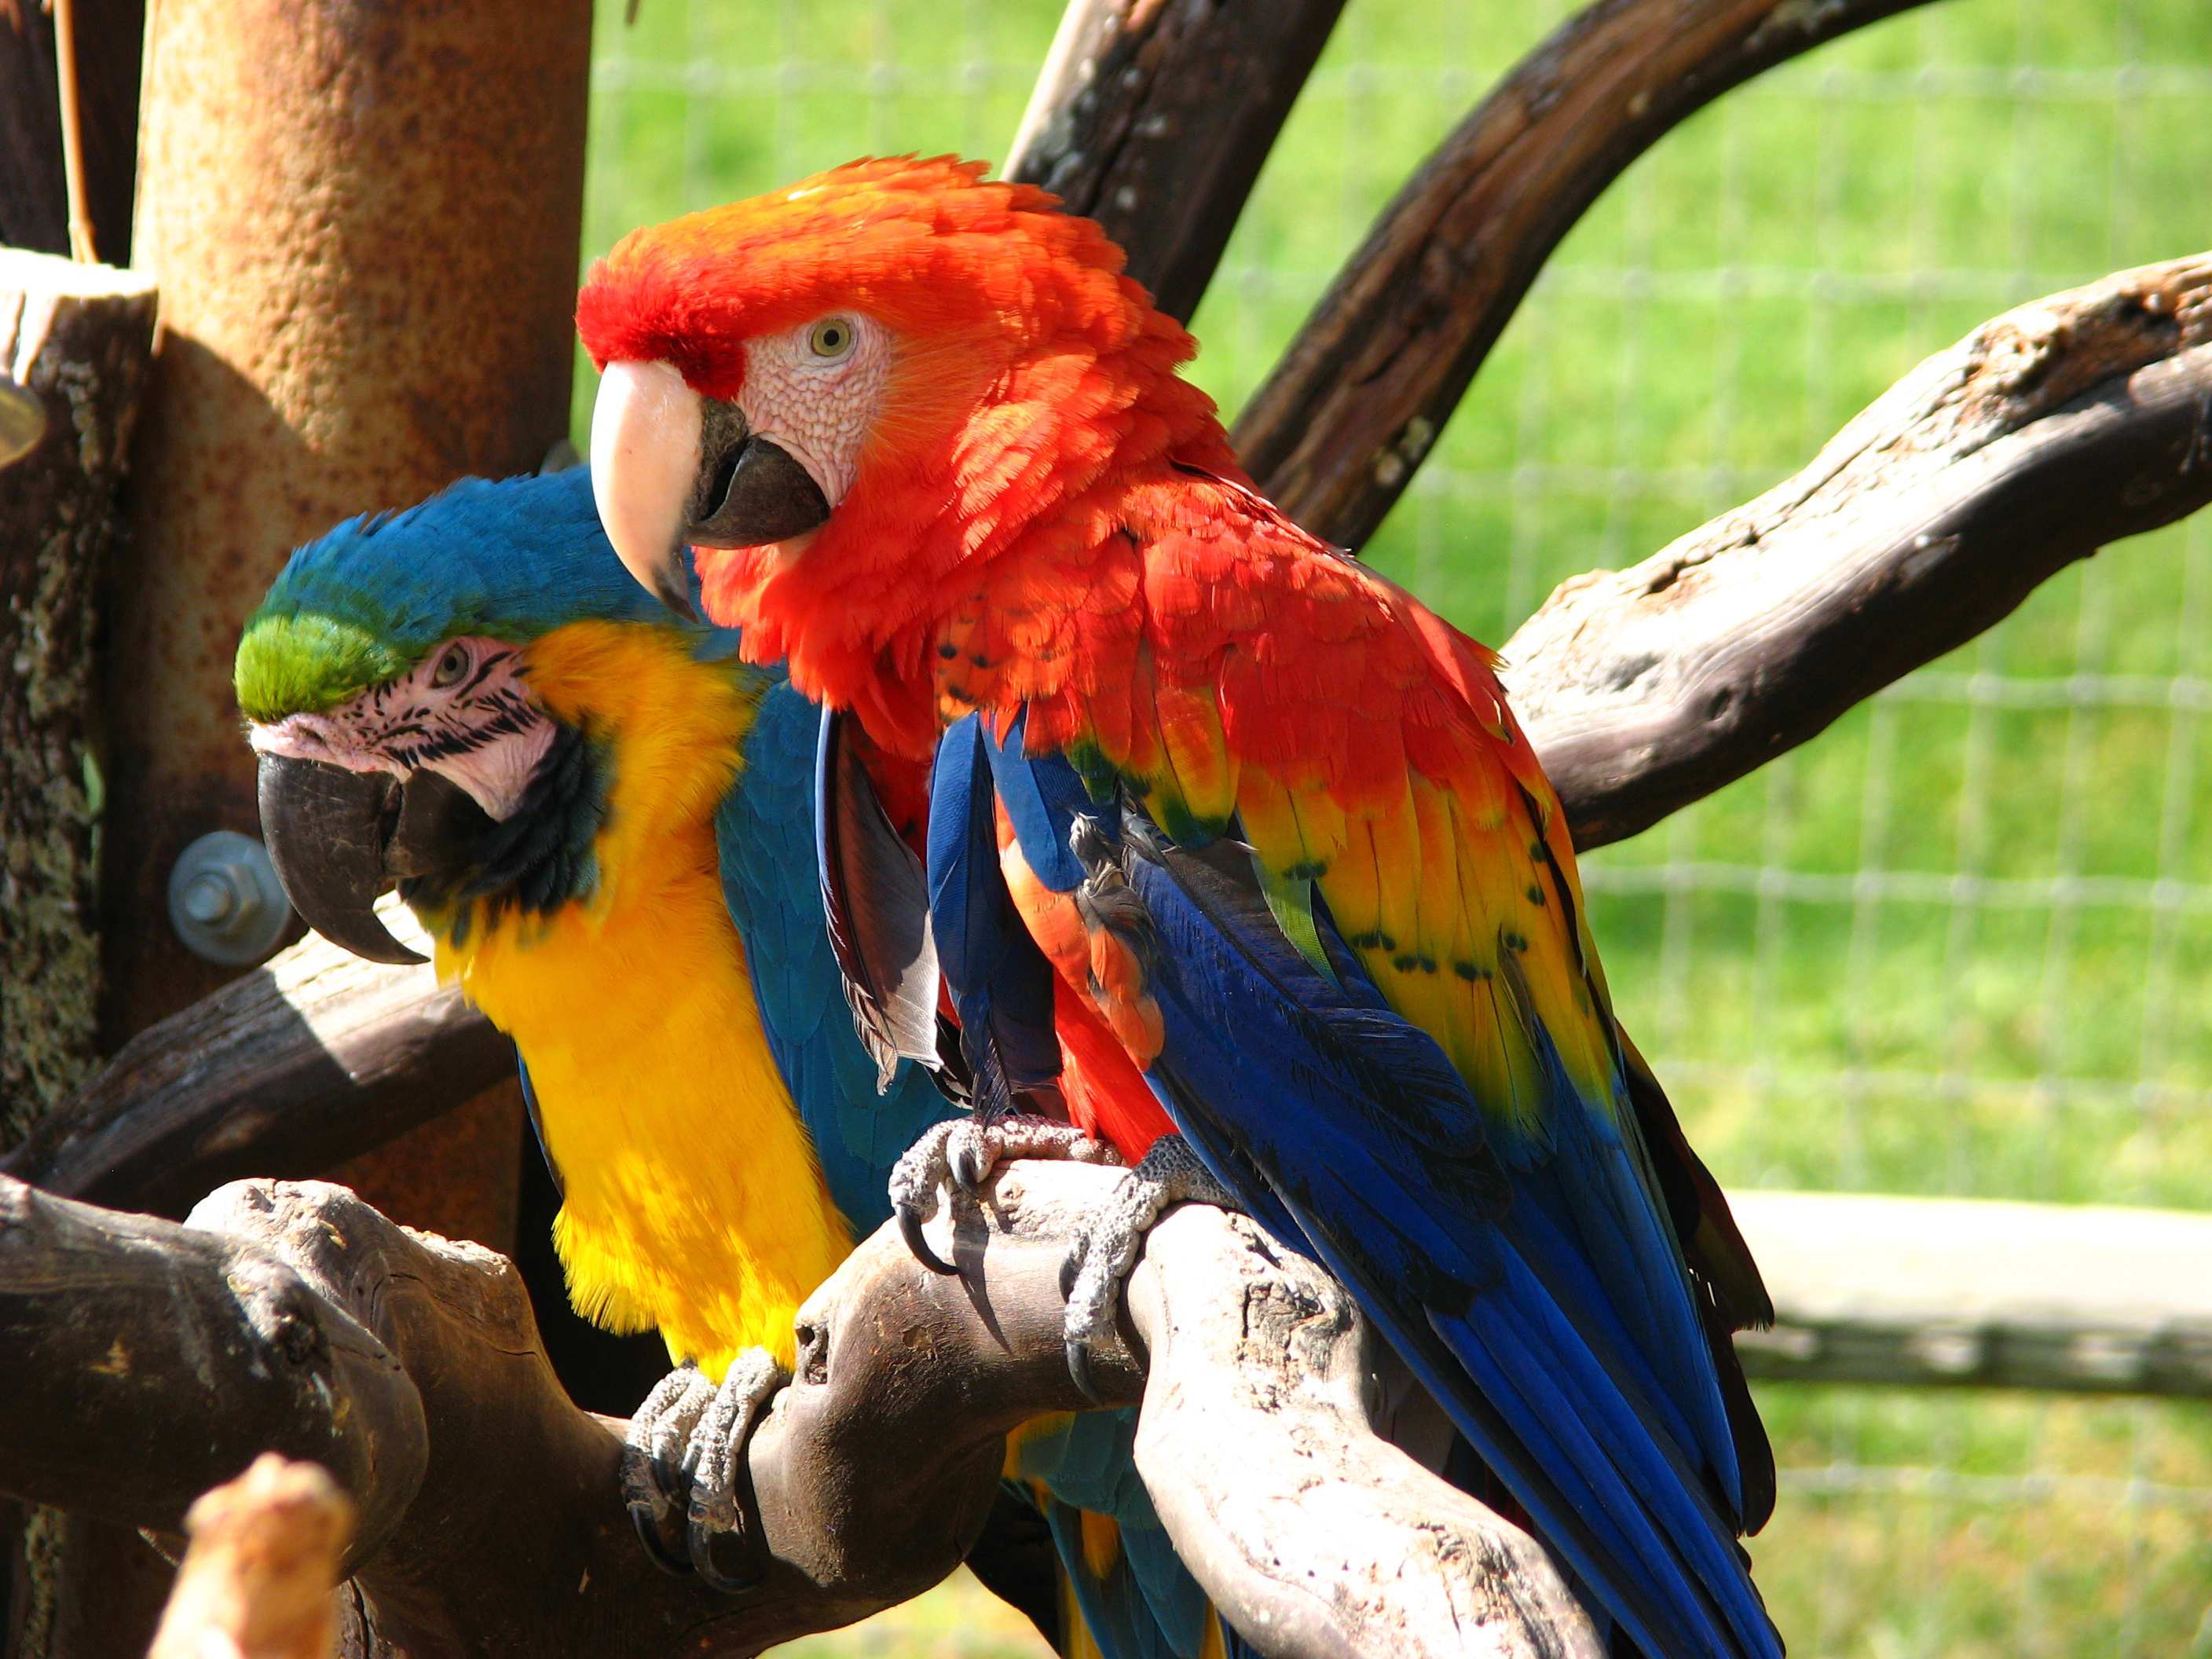 Macaws+as+pets